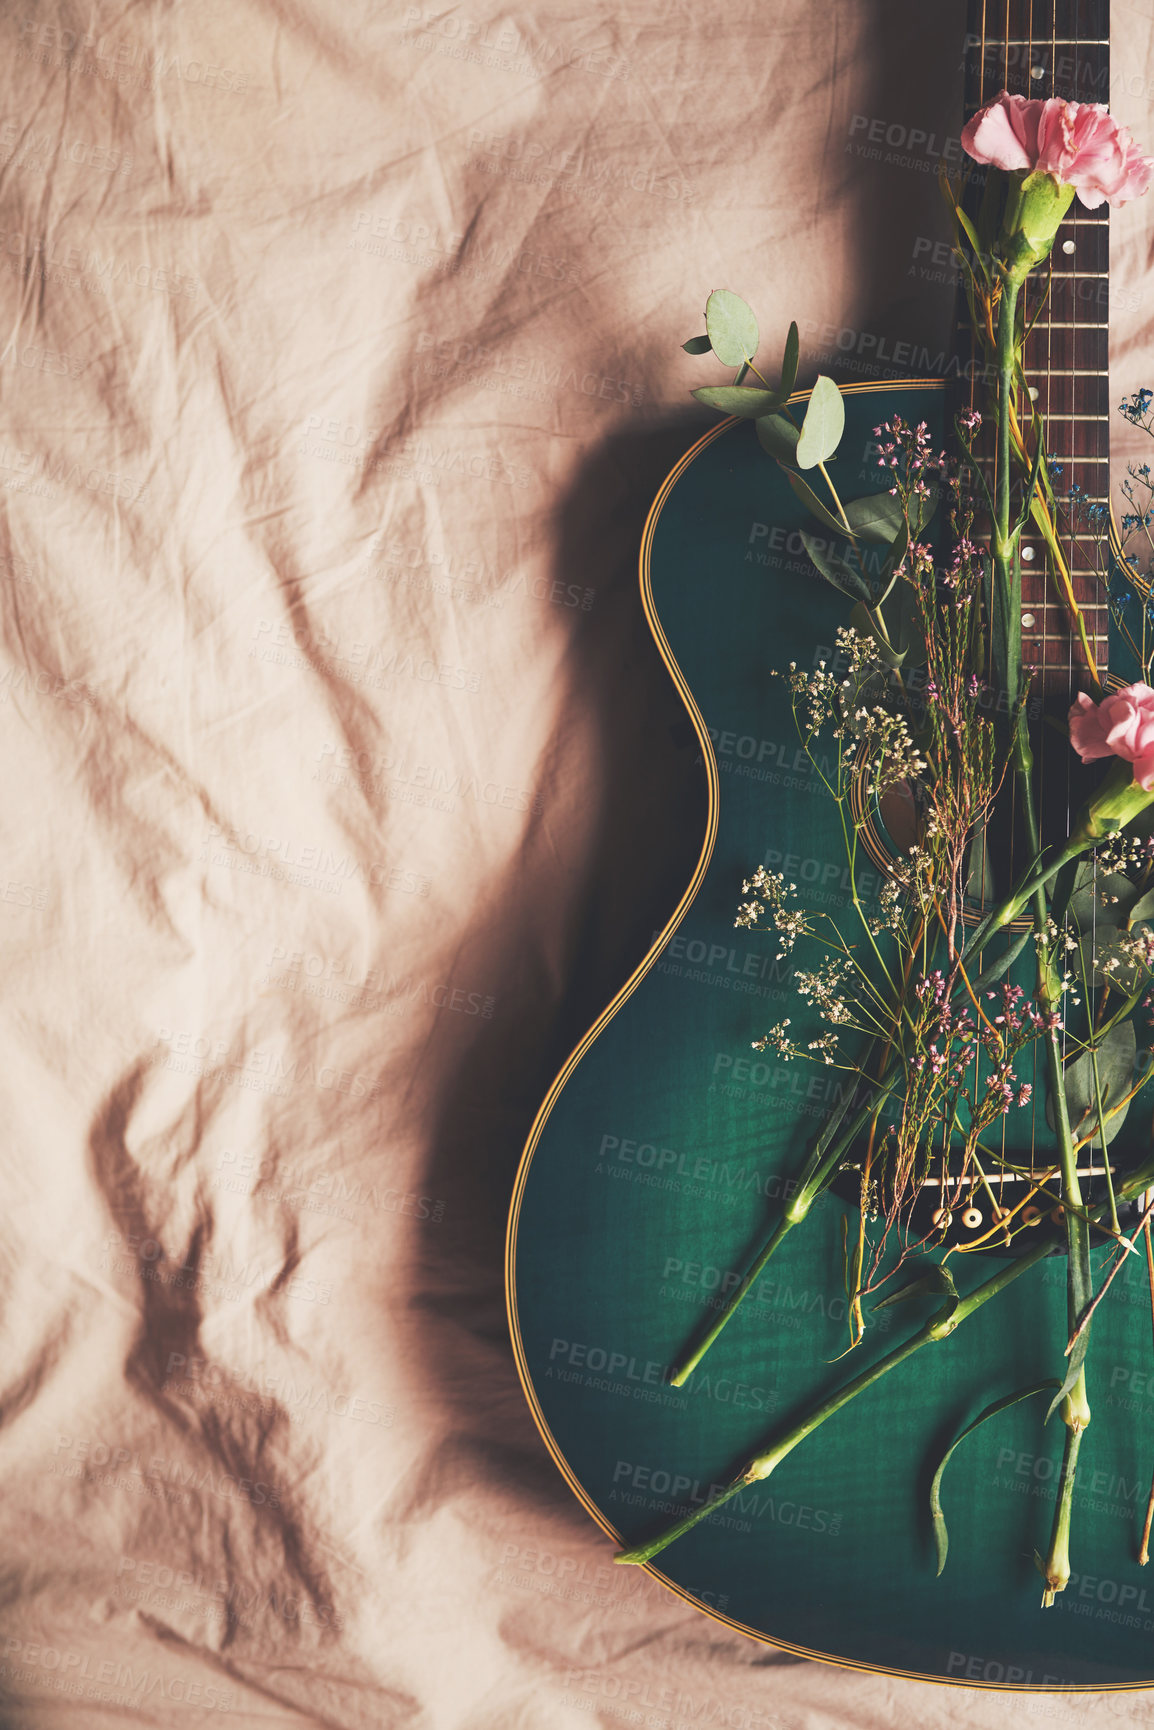 Buy stock photo High angle shot of a green guitar lying on a bed with flowers arranged on it